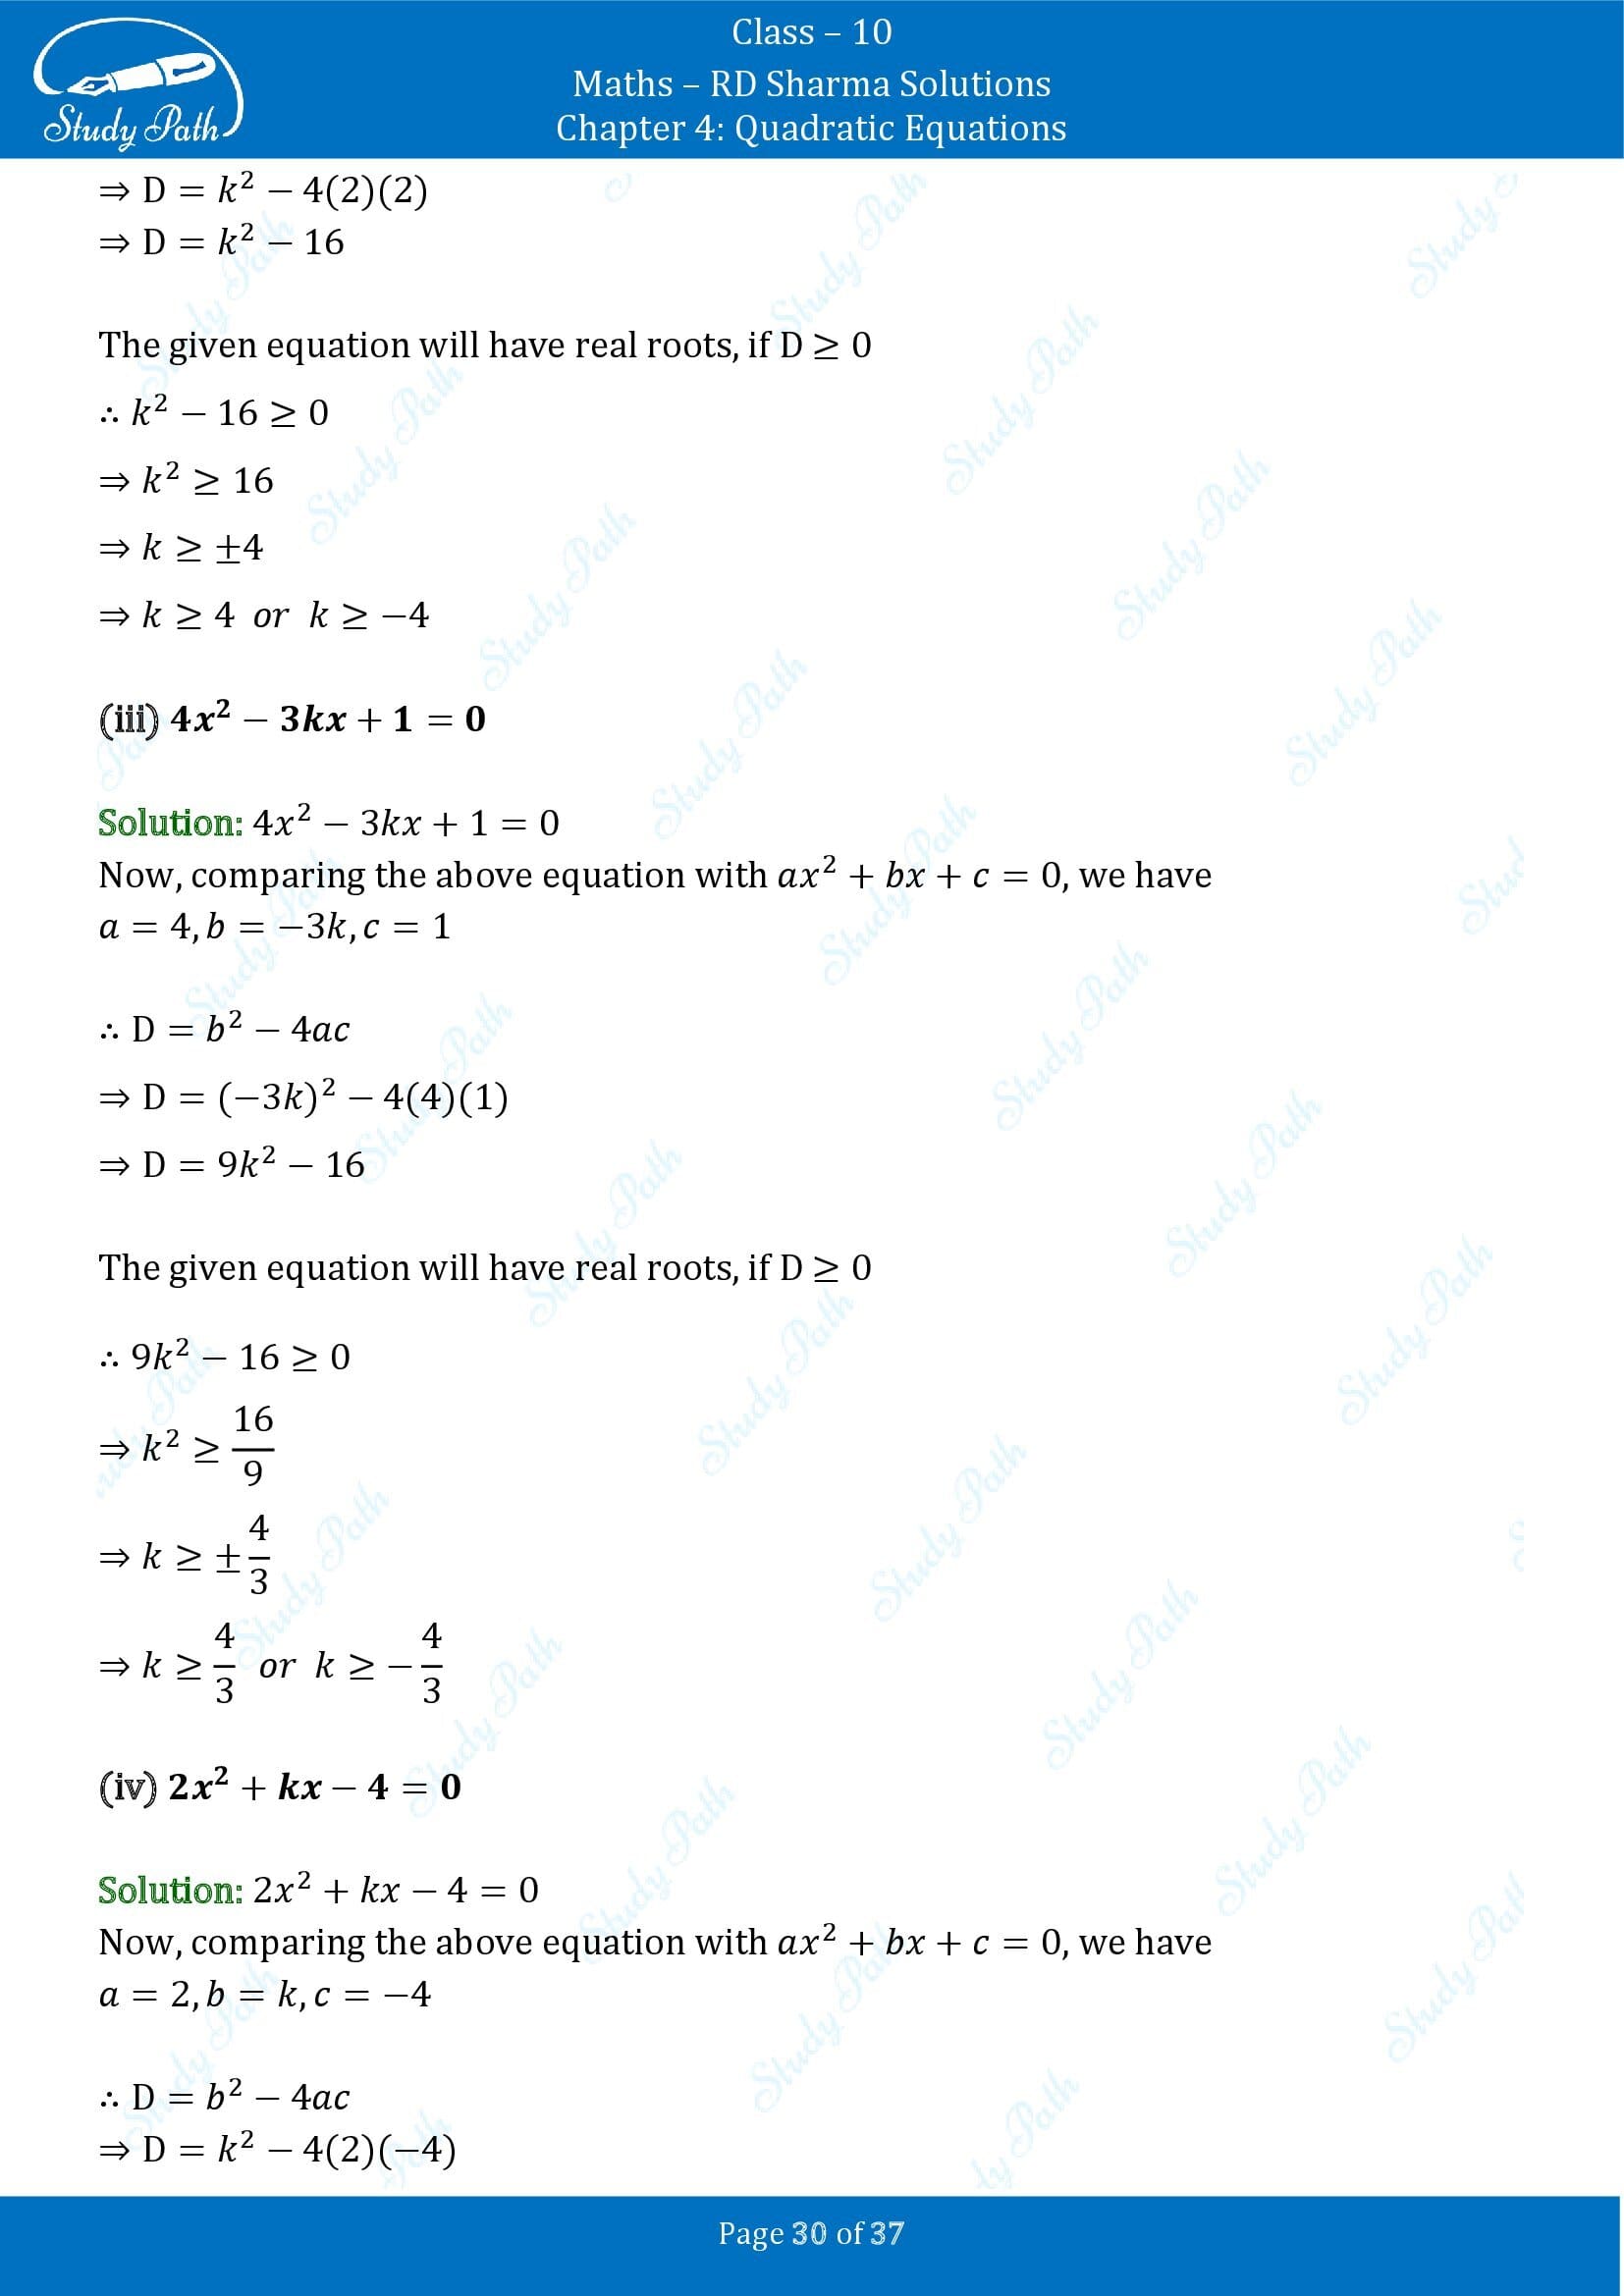 RD Sharma Solutions Class 10 Chapter 4 Quadratic Equations Exercise 4.6 00030